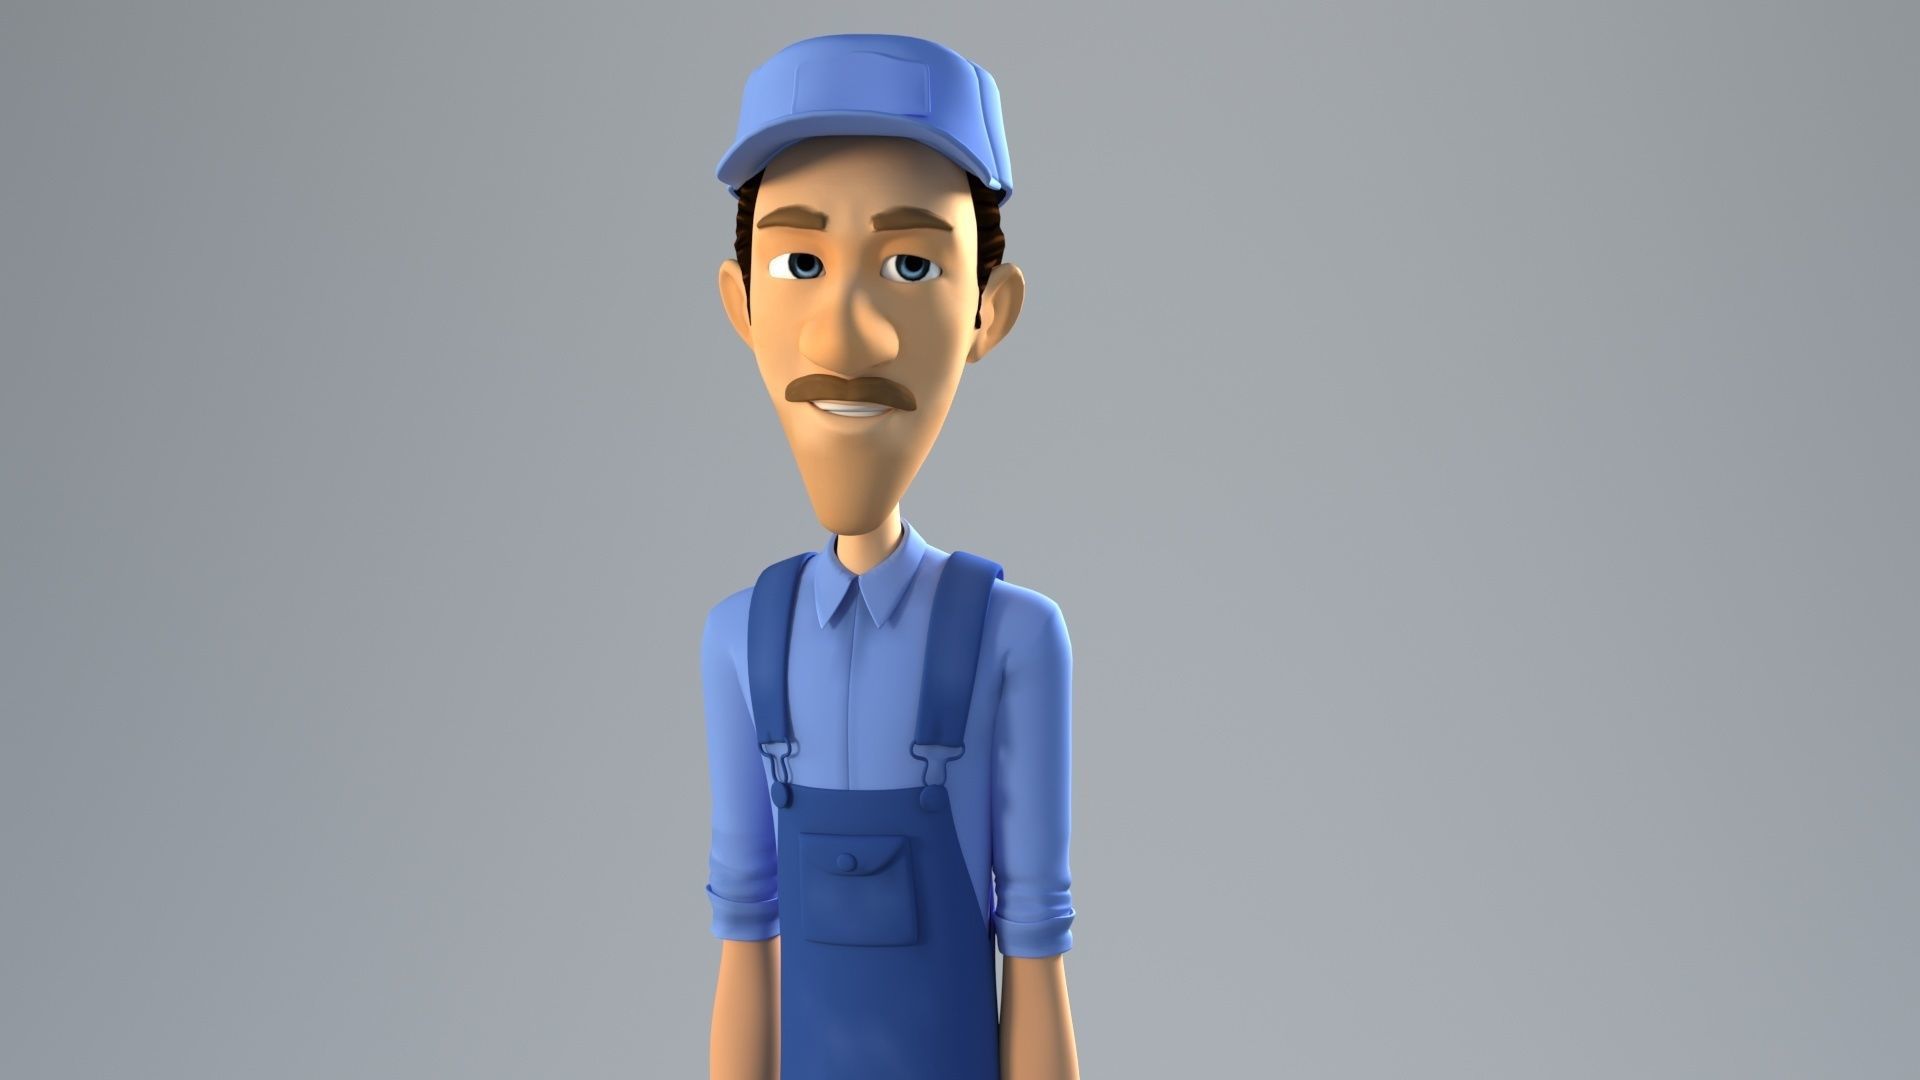 TOON CHARACTER PACK - 21 RIGGED CHAR 3D model - Model 3D Download For Free 13